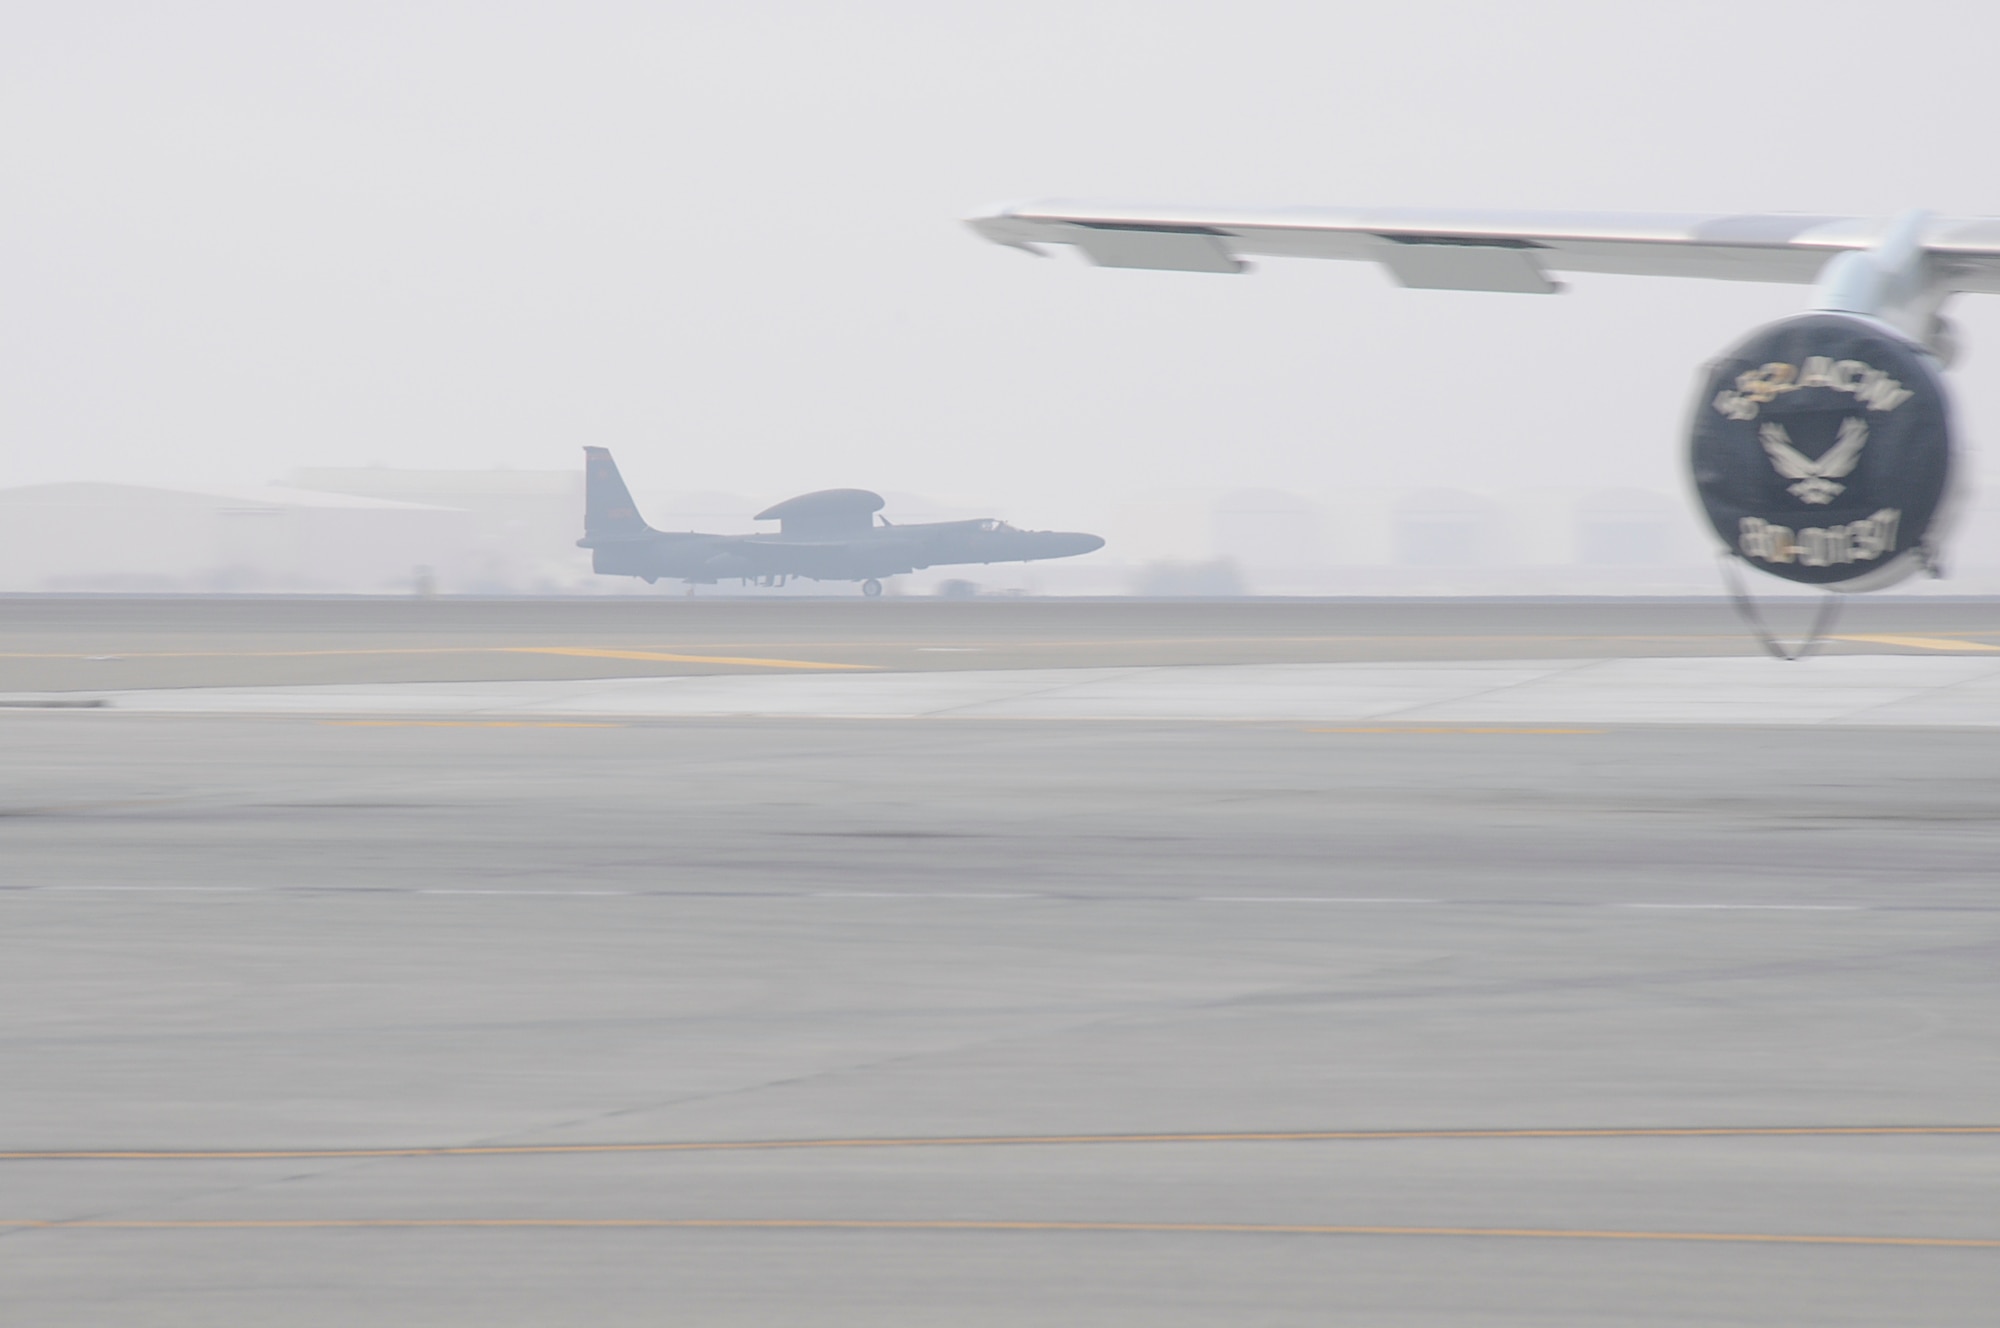 SOUTHWEST ASIA - A U-2 Dragonlady takes off at the 380th Air Expeditionary Wing on a foggy morning, Jan 28. The 380th AEW maintains all mission capabilities through any weather conditions and always stands mission ready. The U-2 Dragonlady is deployed to the 380th AEW from Beale AFB, Calif. (U.S. Air Force photo by Senior Airman Brian J. Ellis) (Released)